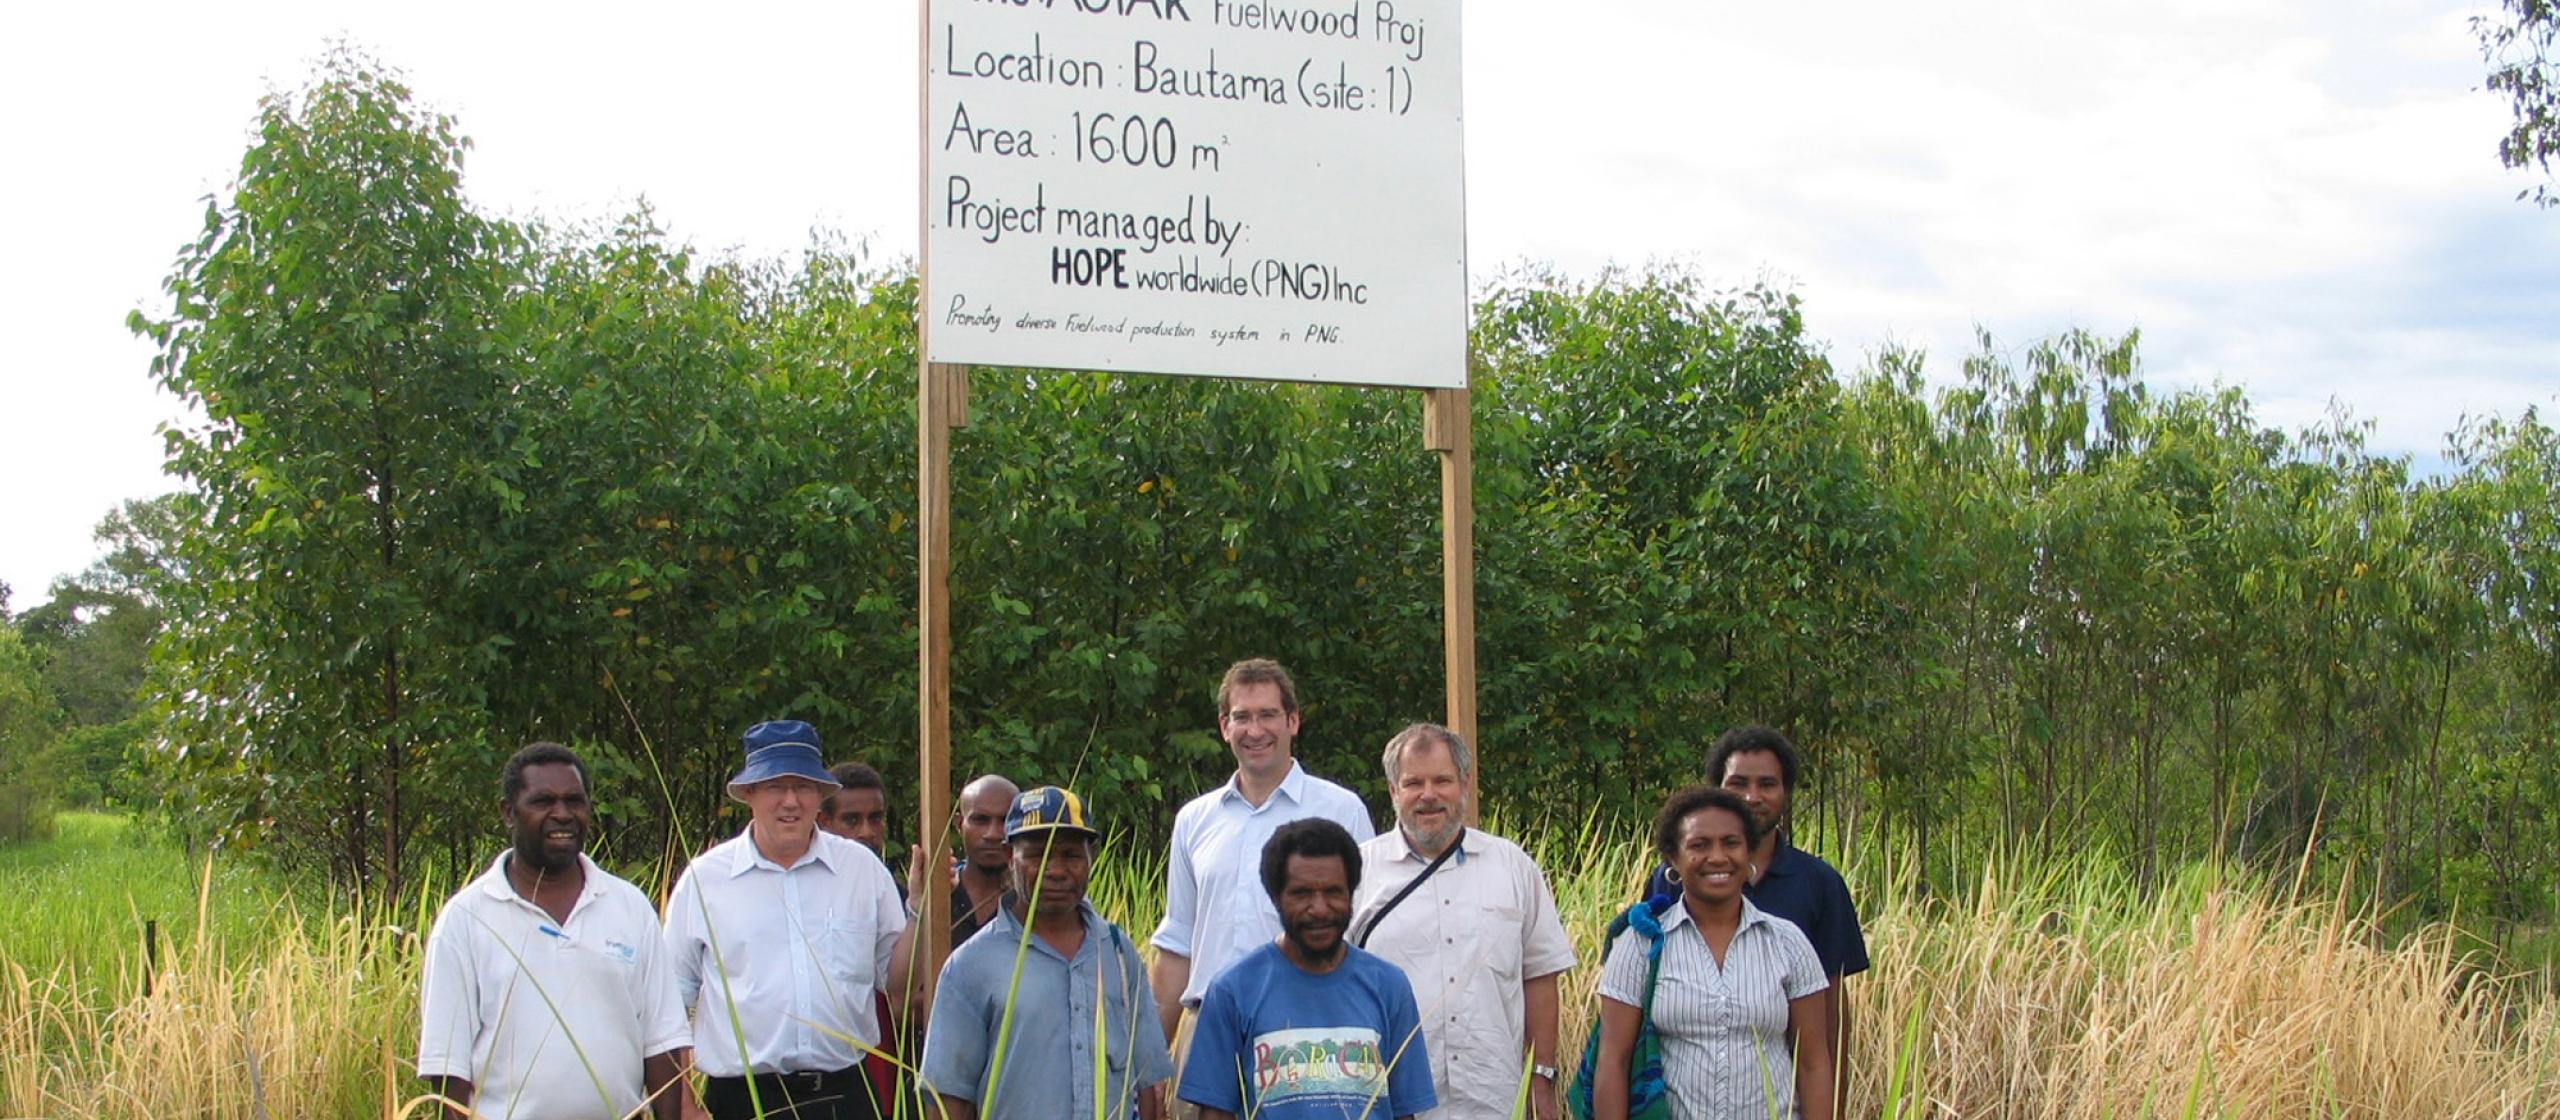 A group stands under the ACIAR Fuelwood project sign